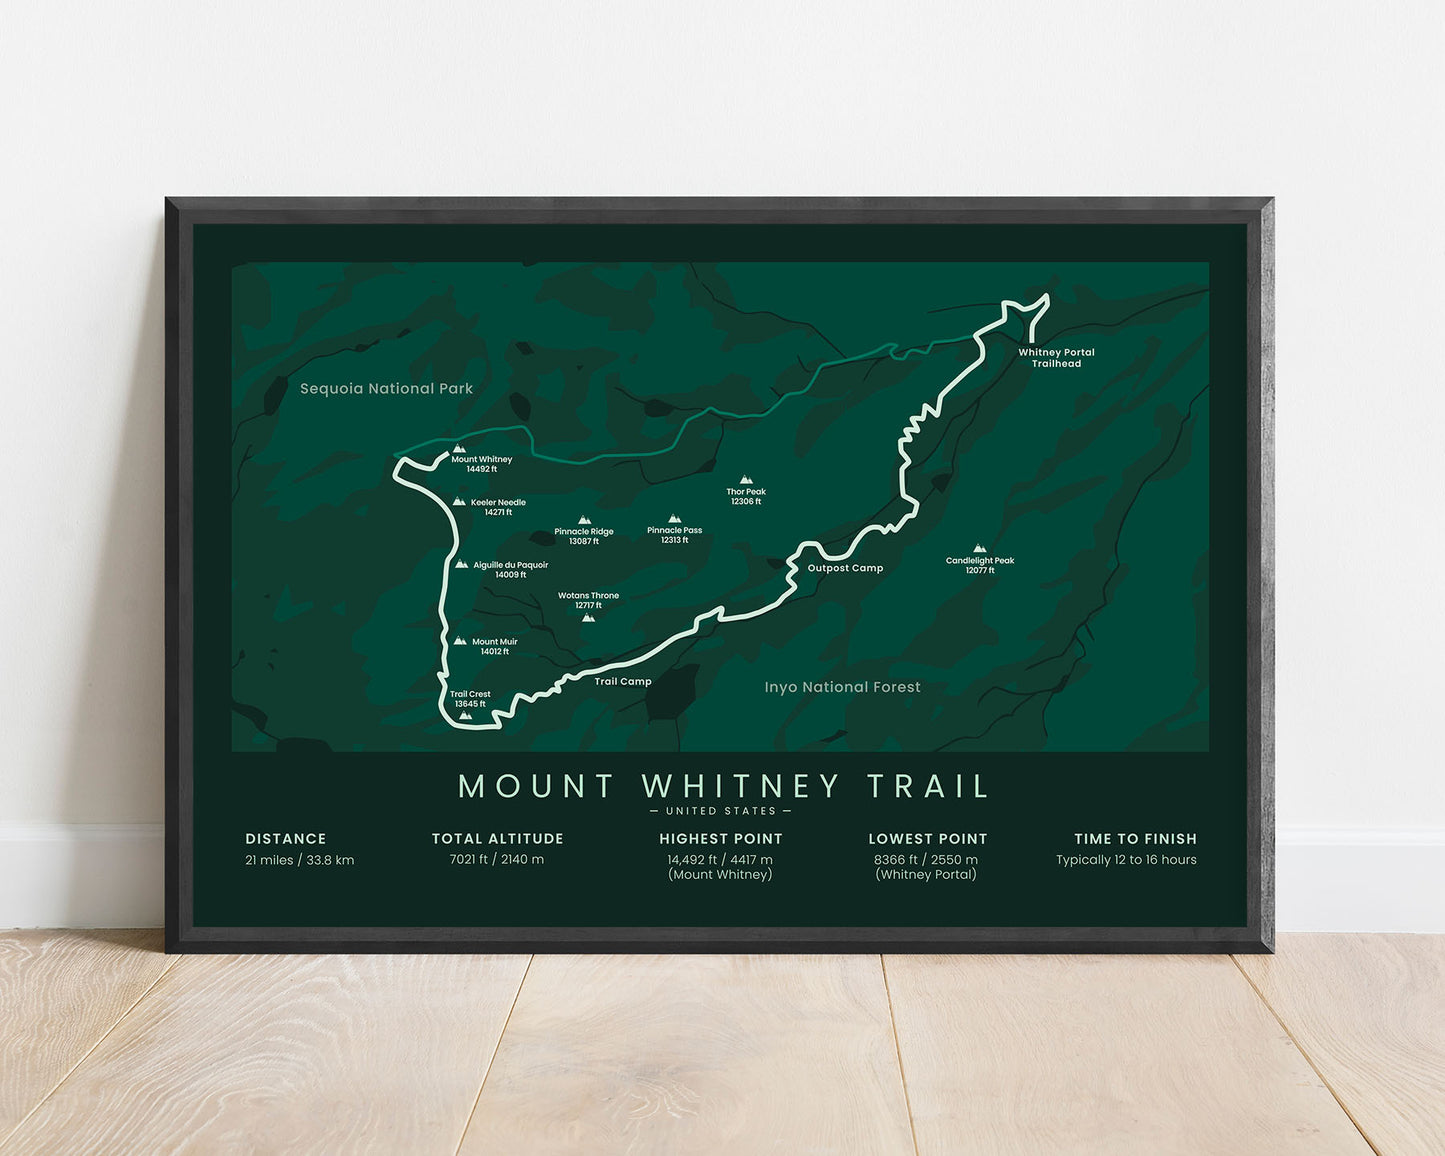 Mount Whitney Trail (United States) Track Wall Art with green background